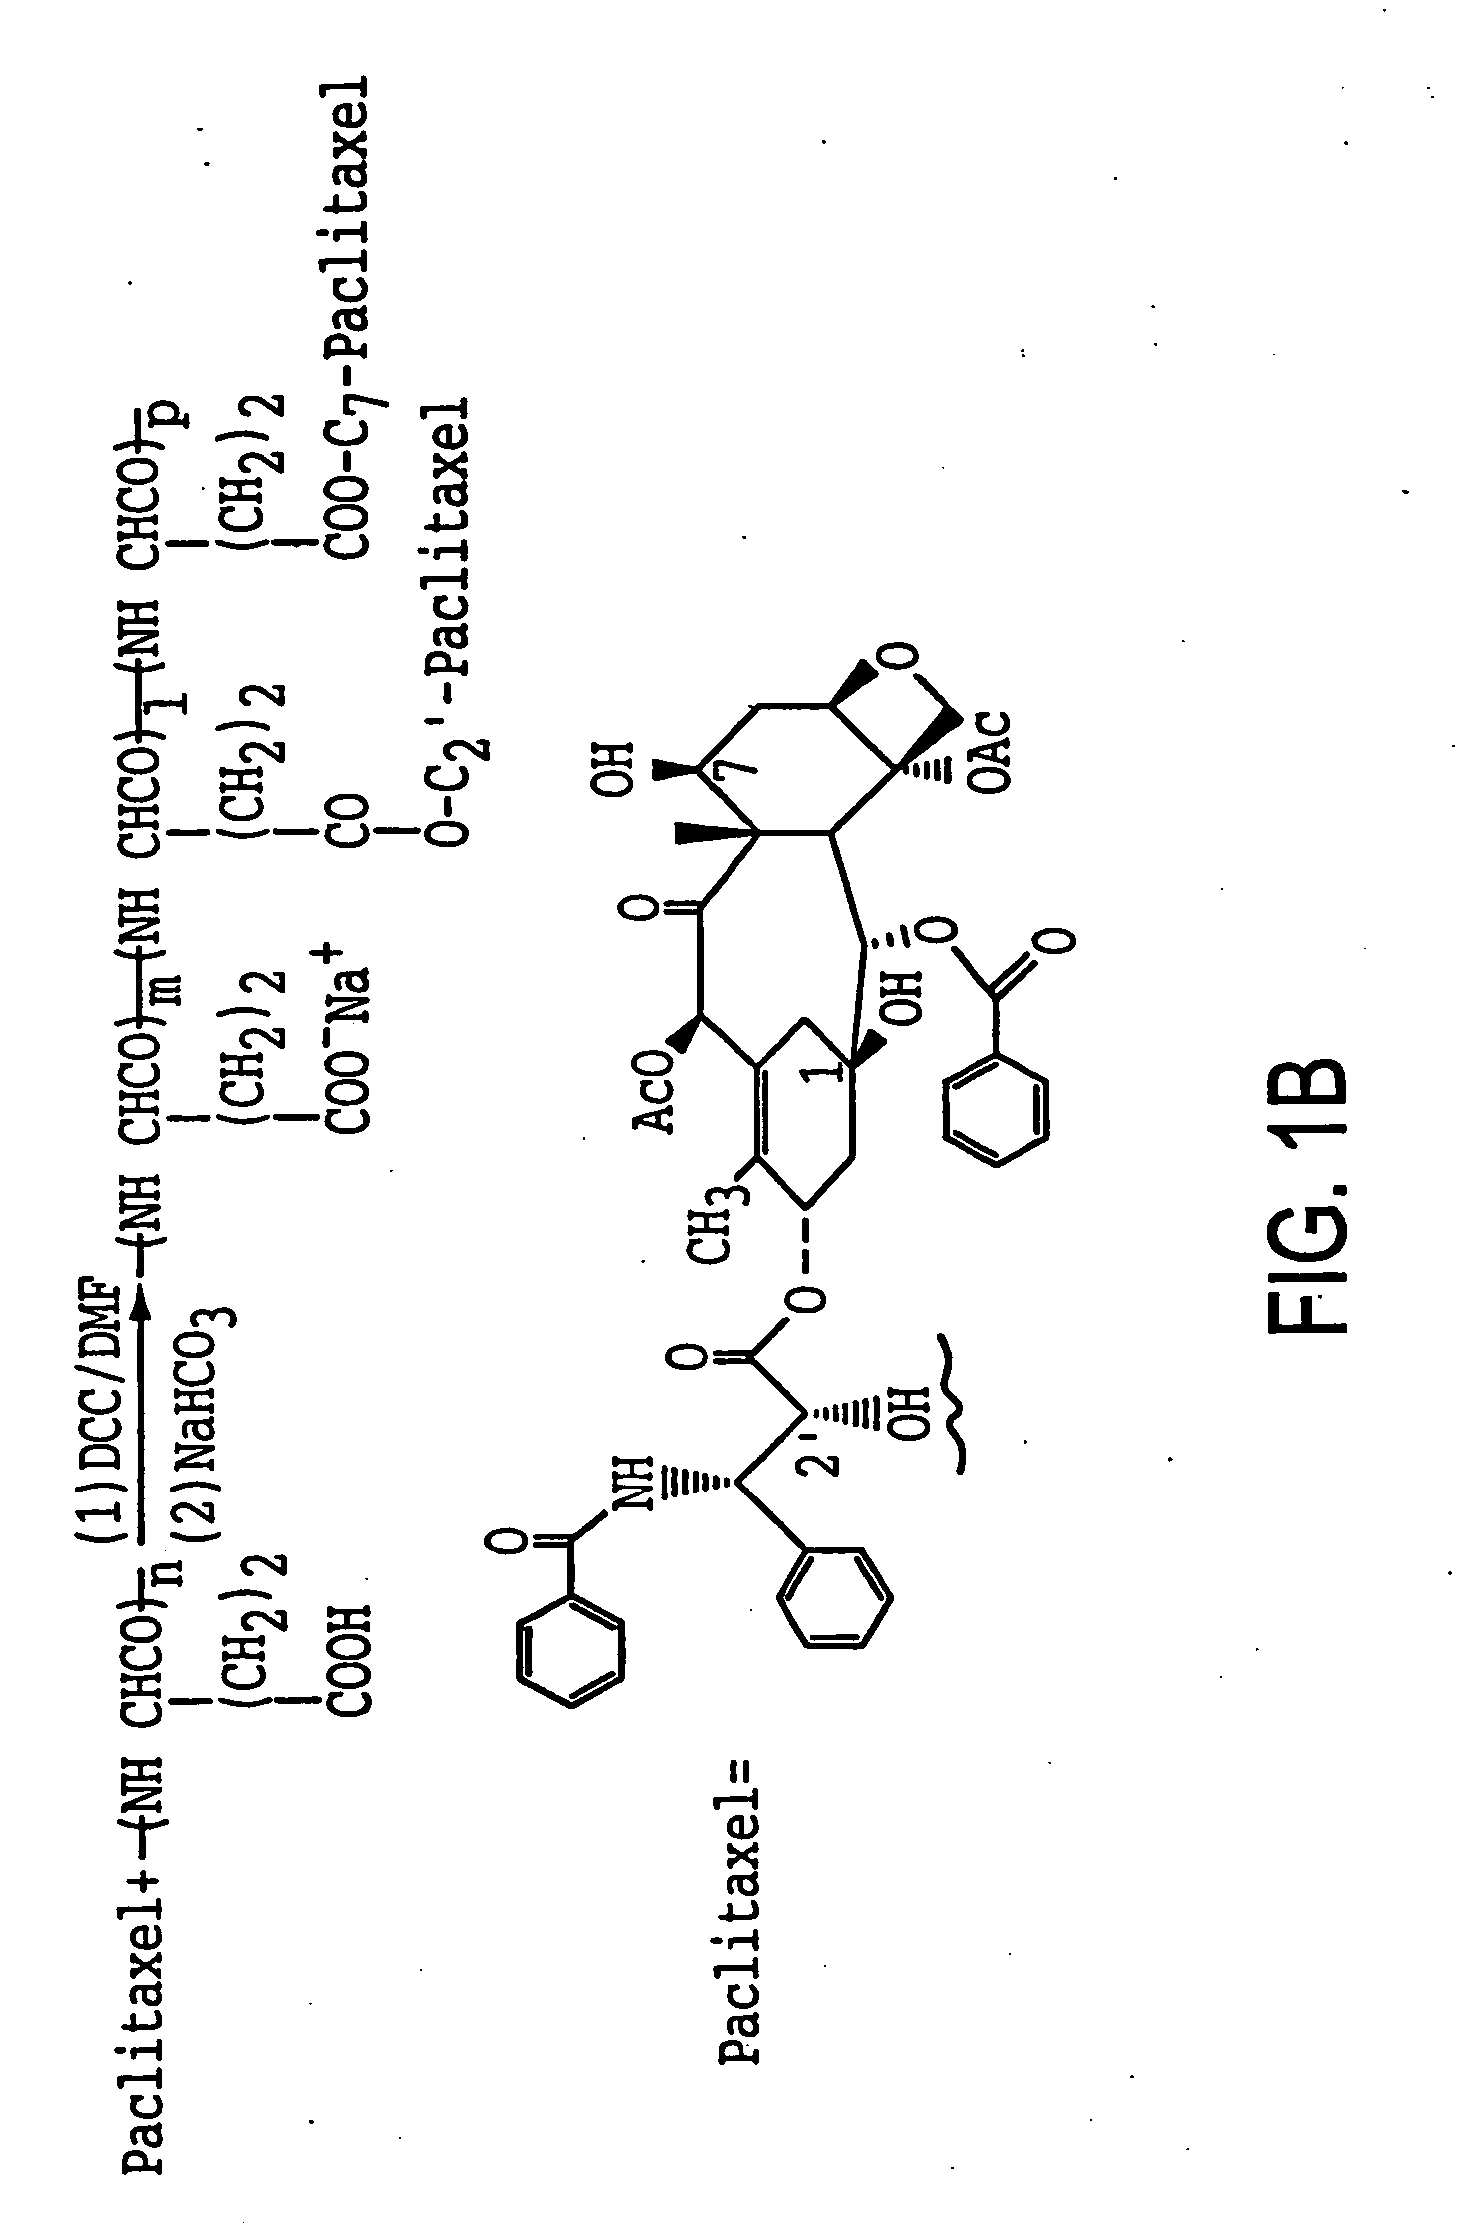 Water soluble paclitaxel derivatives